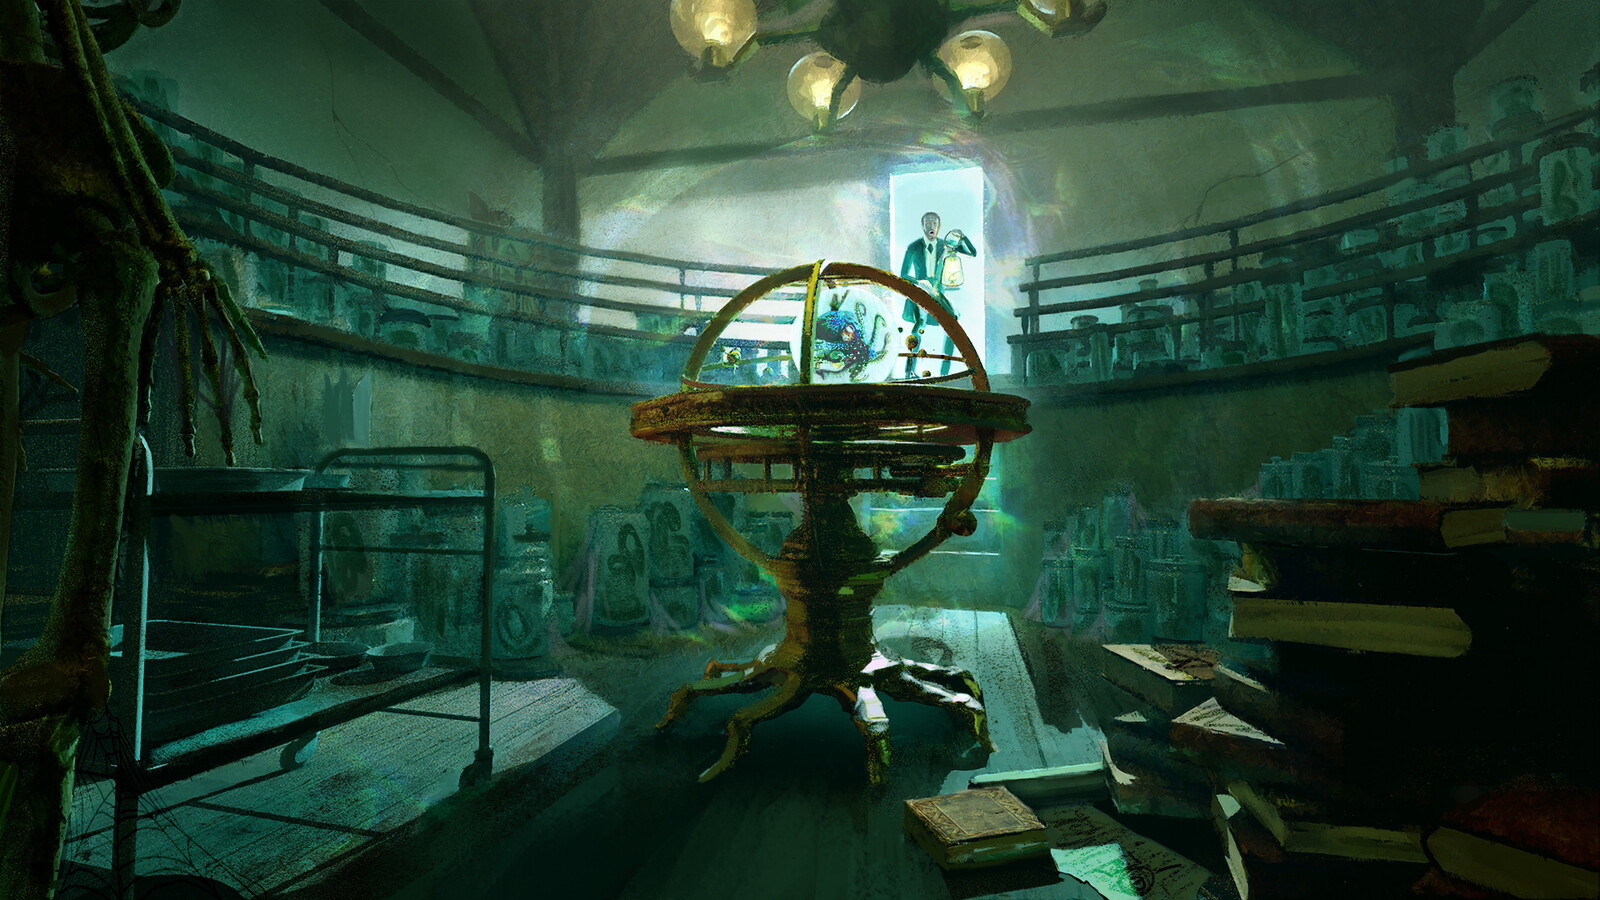  Obed Marsh enters the old operating theatre shocked to see a strange Orrery. A bizarre creature in the center of the Orrery captivates Marsh with its strange spell. 